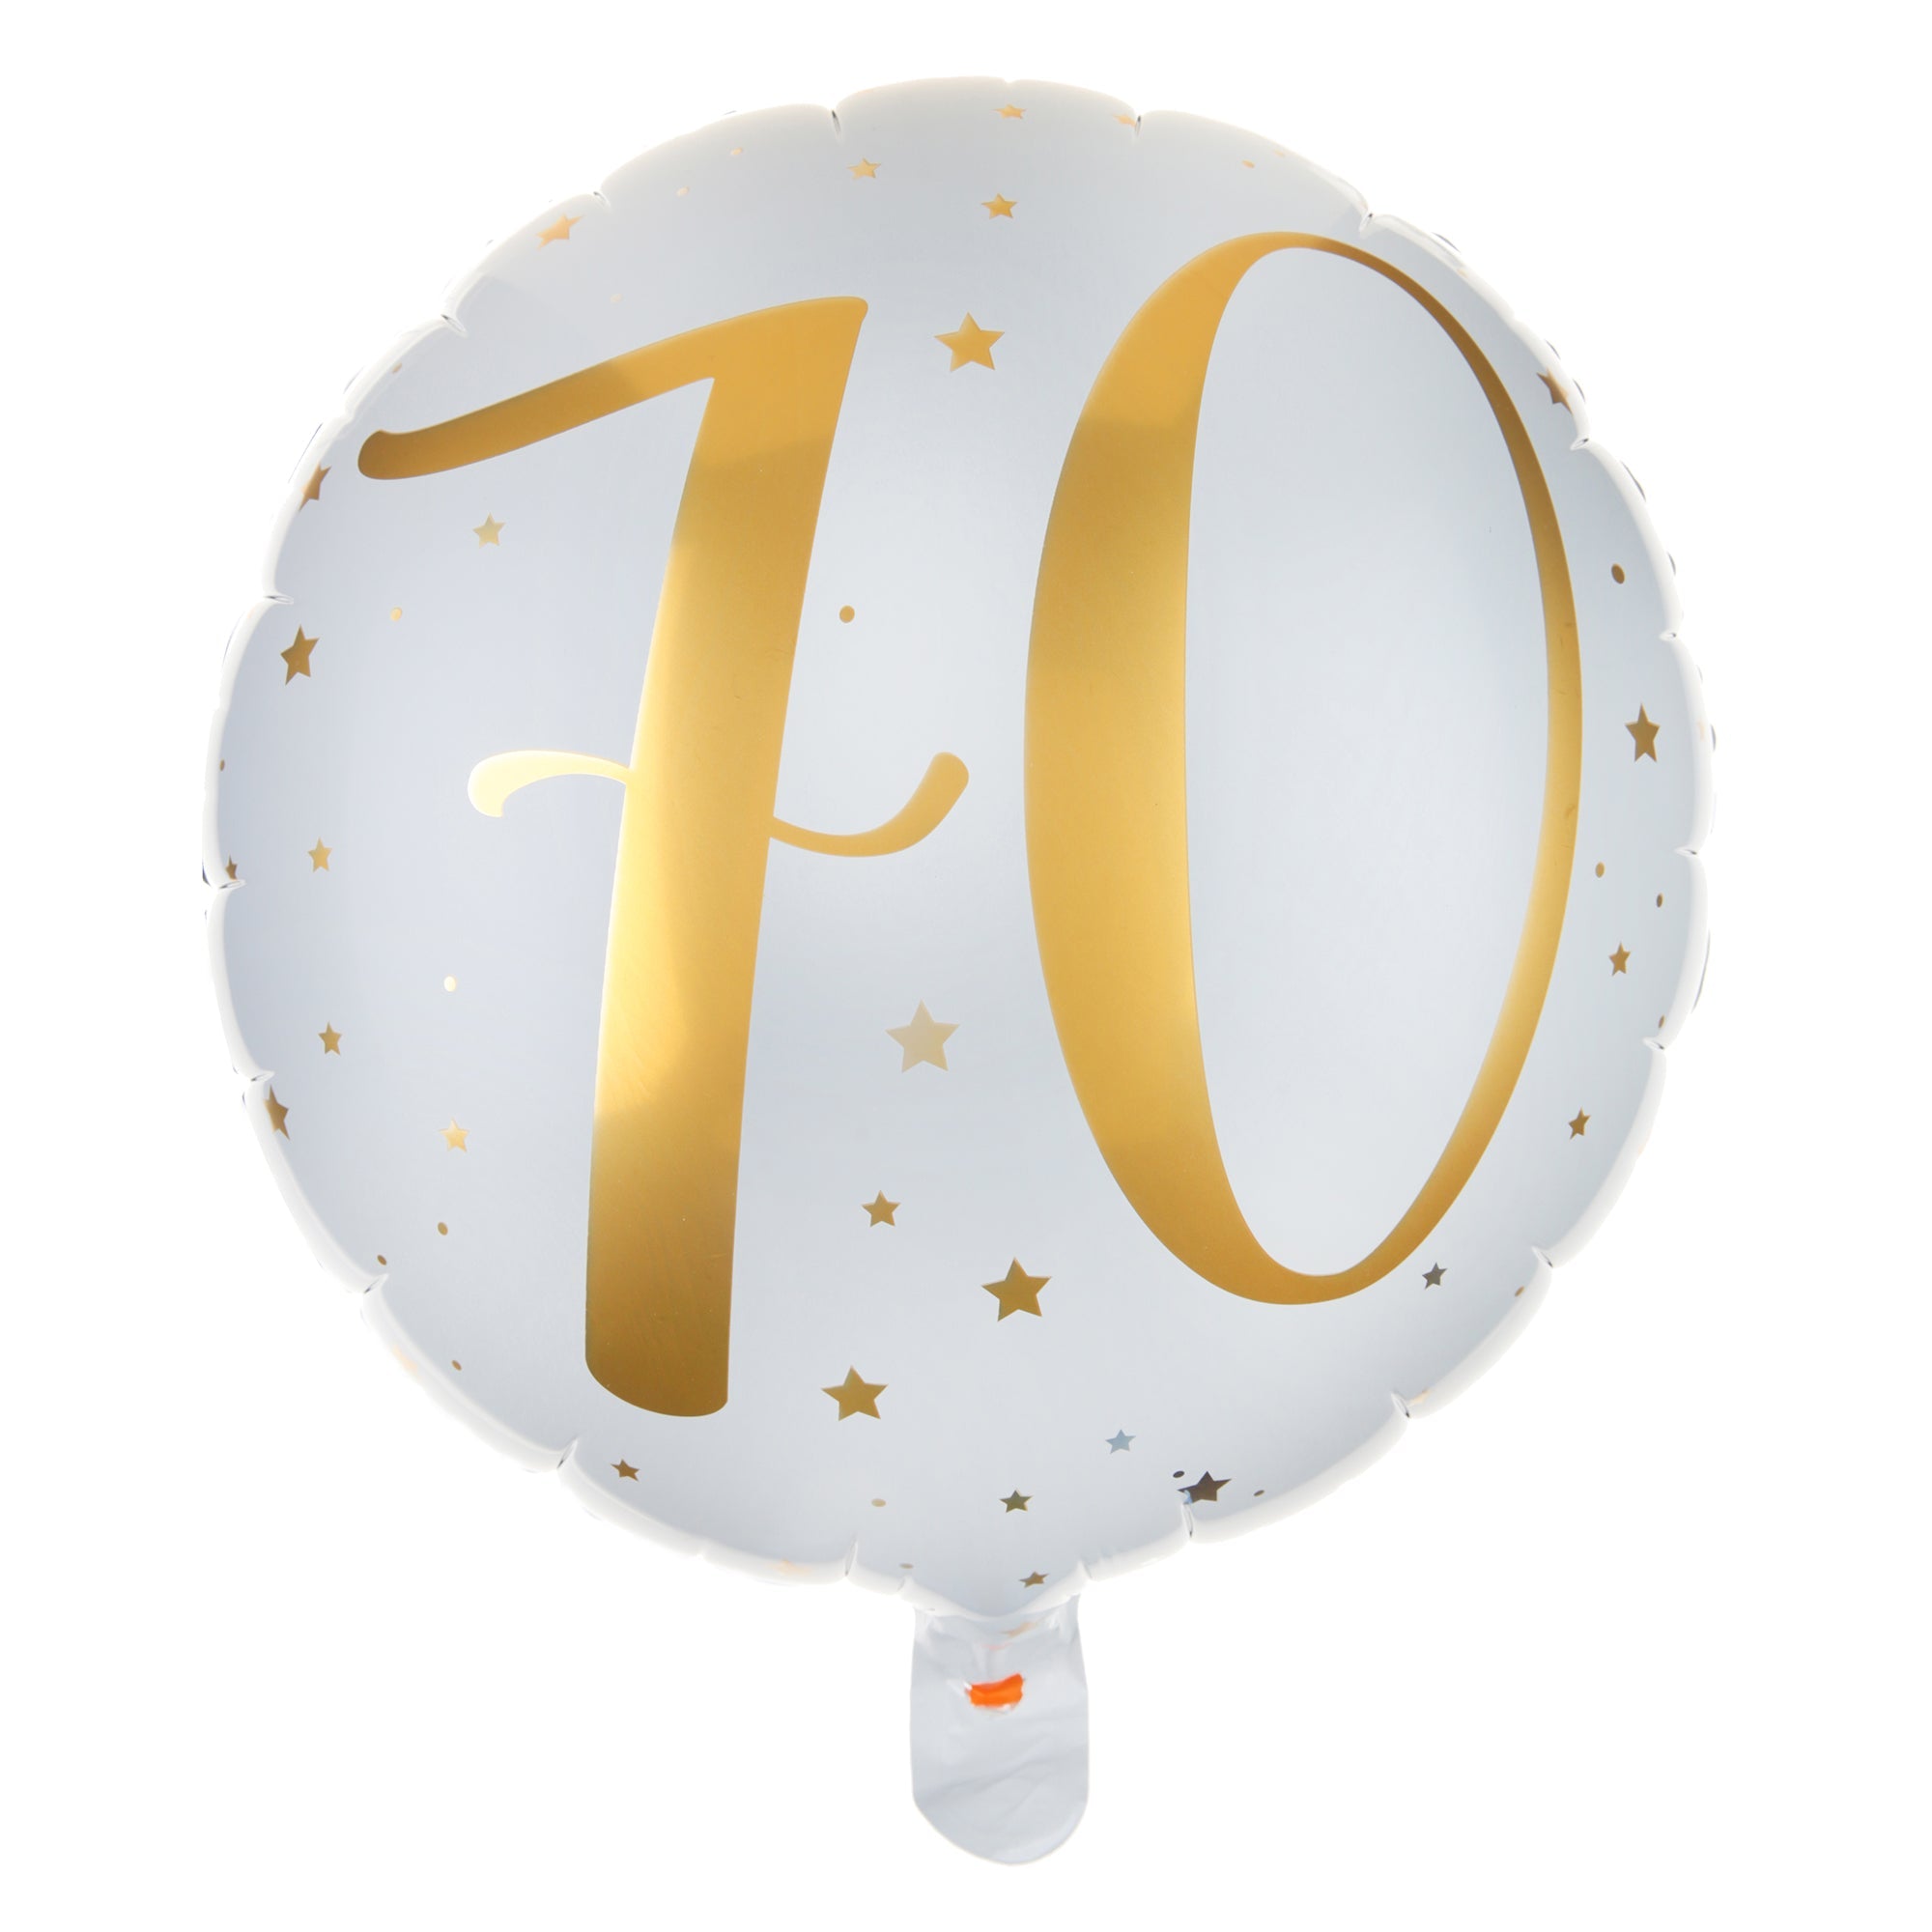 Age 70 Foil Balloon White and Gold 18in